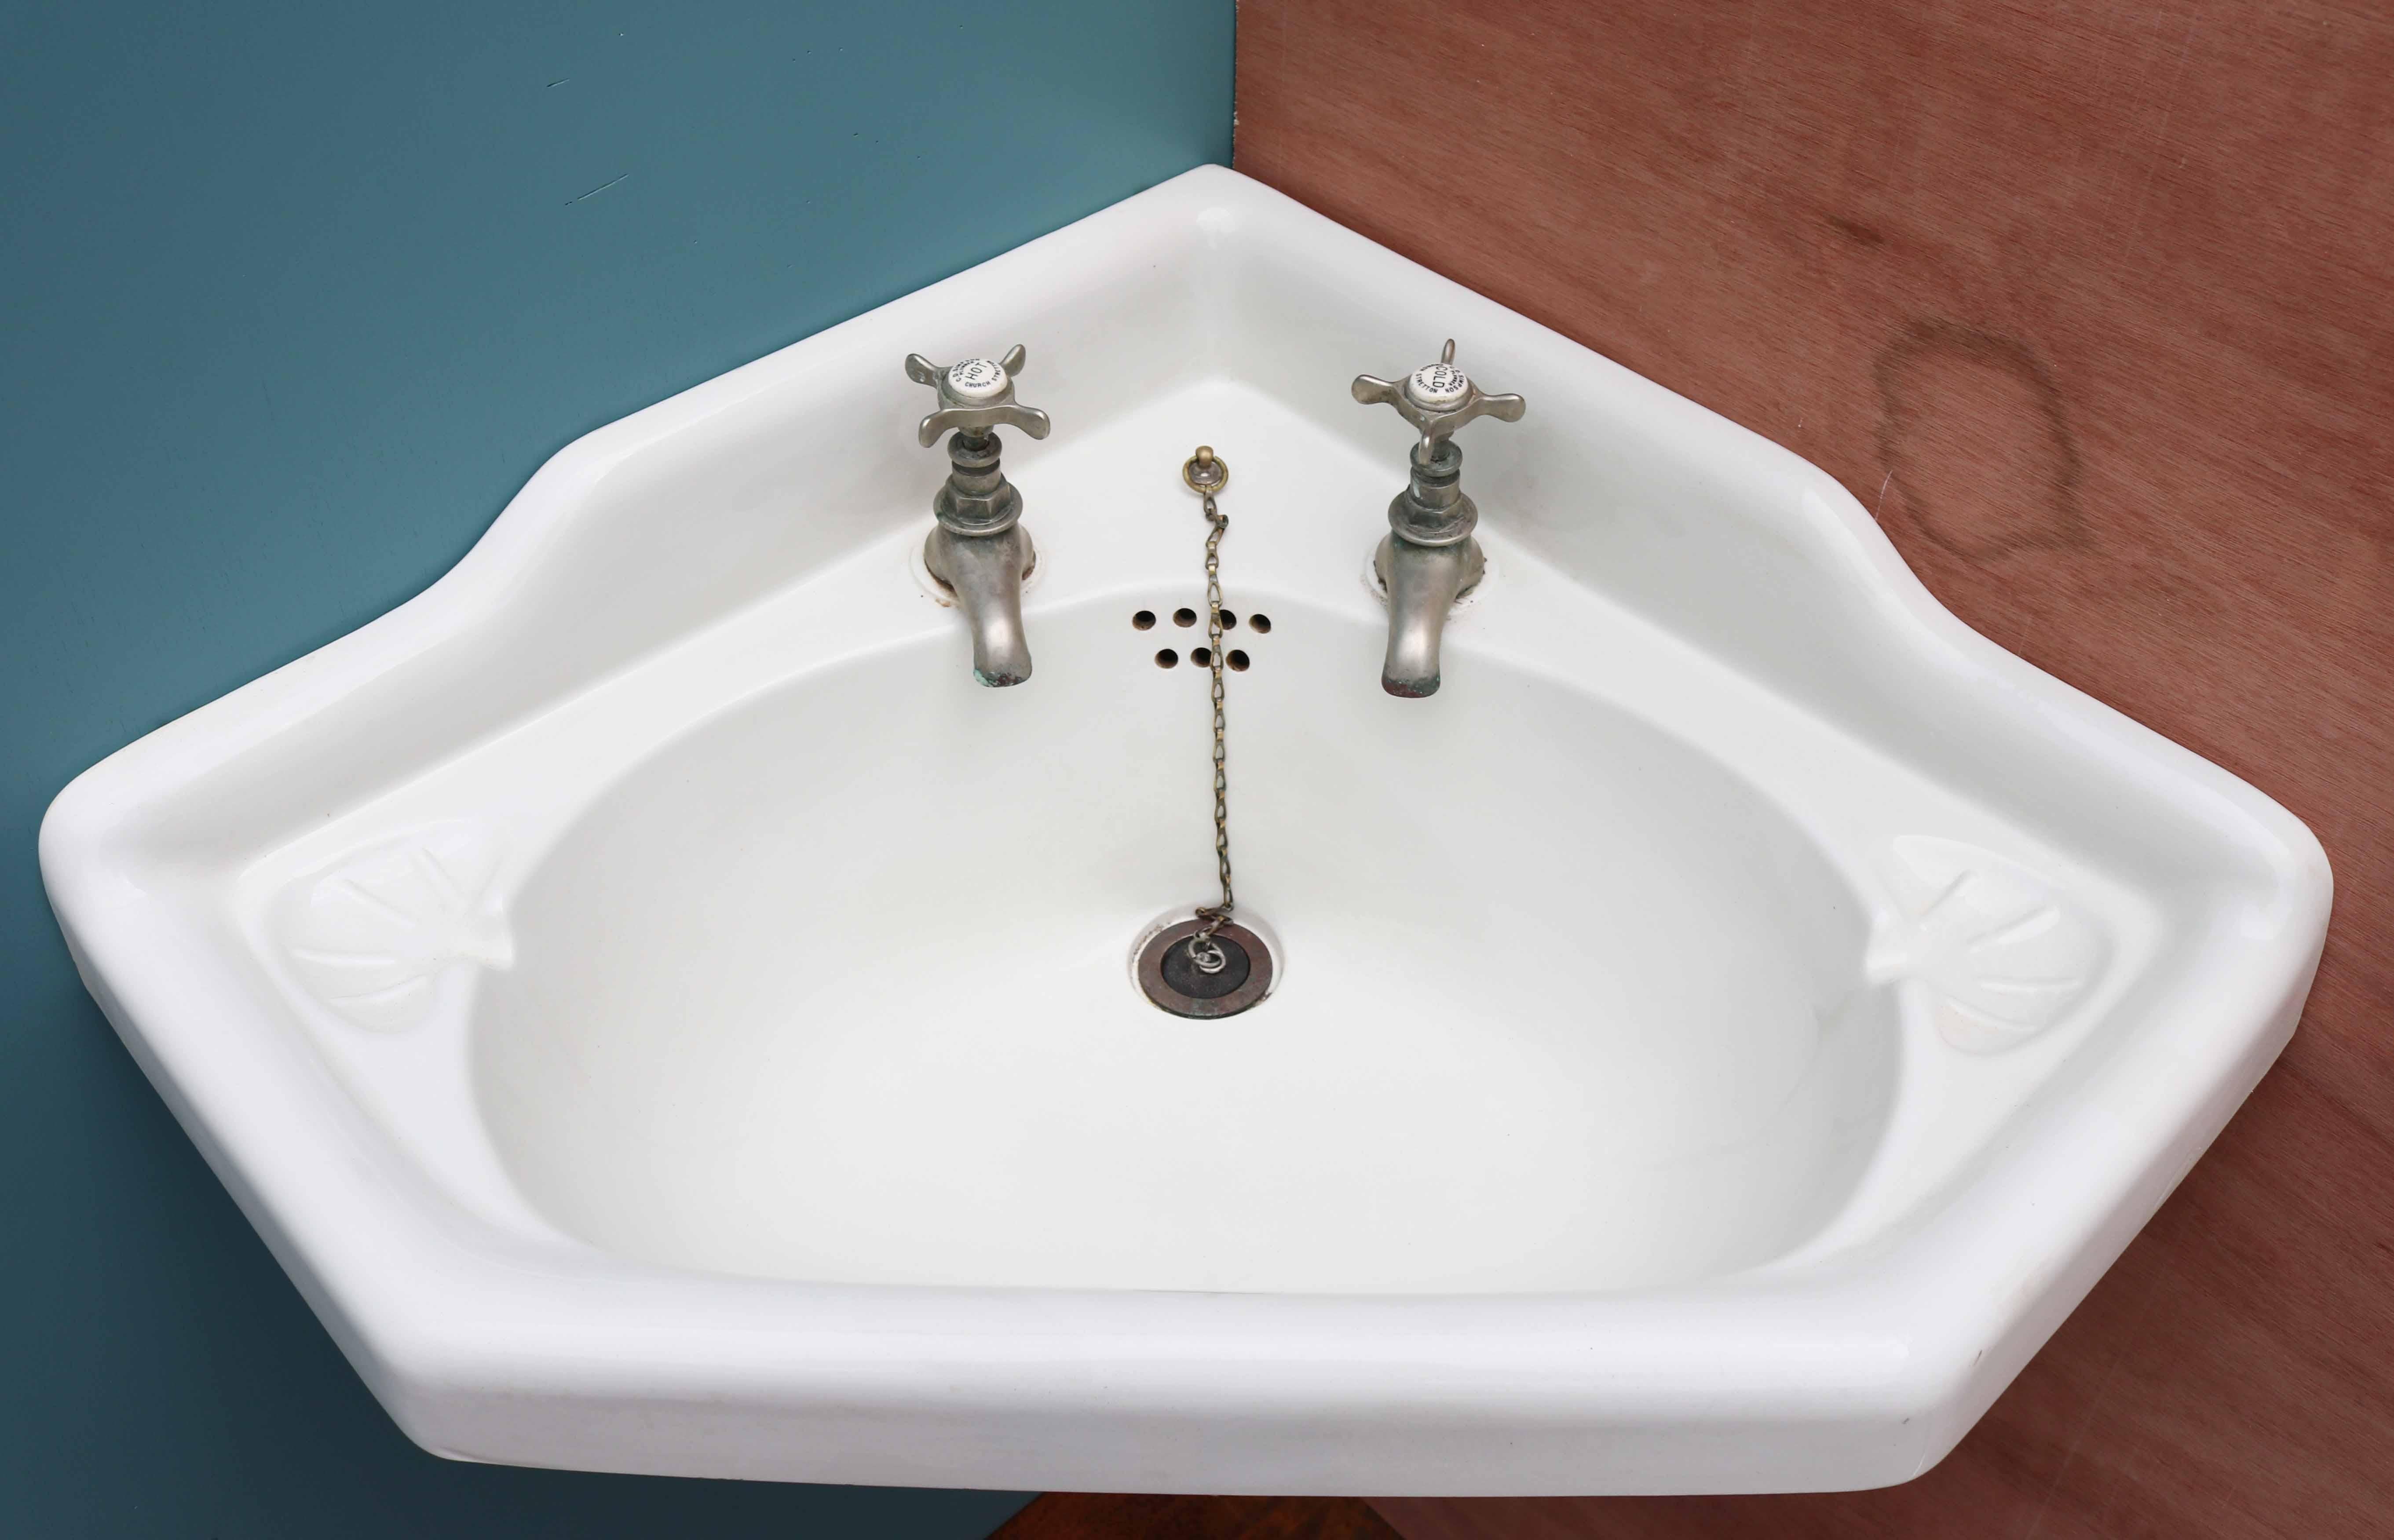 A reclaimed porcelain corner basin with original wall mounted bracket, finished in grey primer. The taps are marked ‘C Simpson Plumber Church Stretton’.

Additional dimensions:

Width 56cm x 56cm each side.